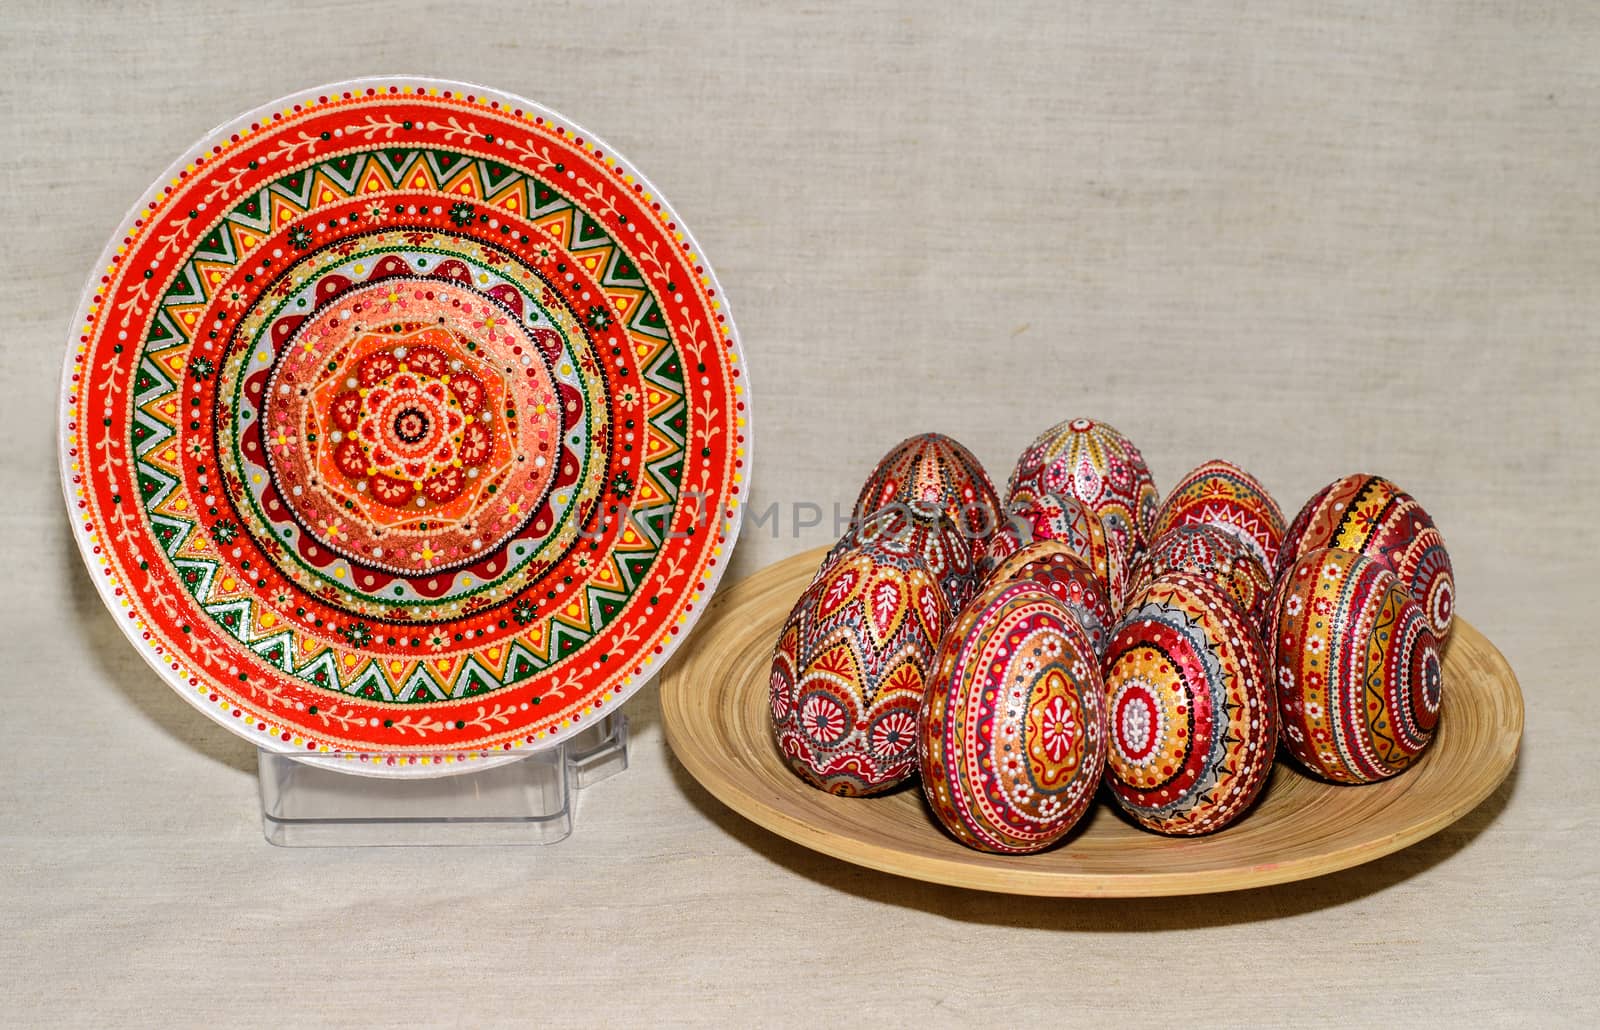 Easter eggs, the hand-painted with acrylic paints.